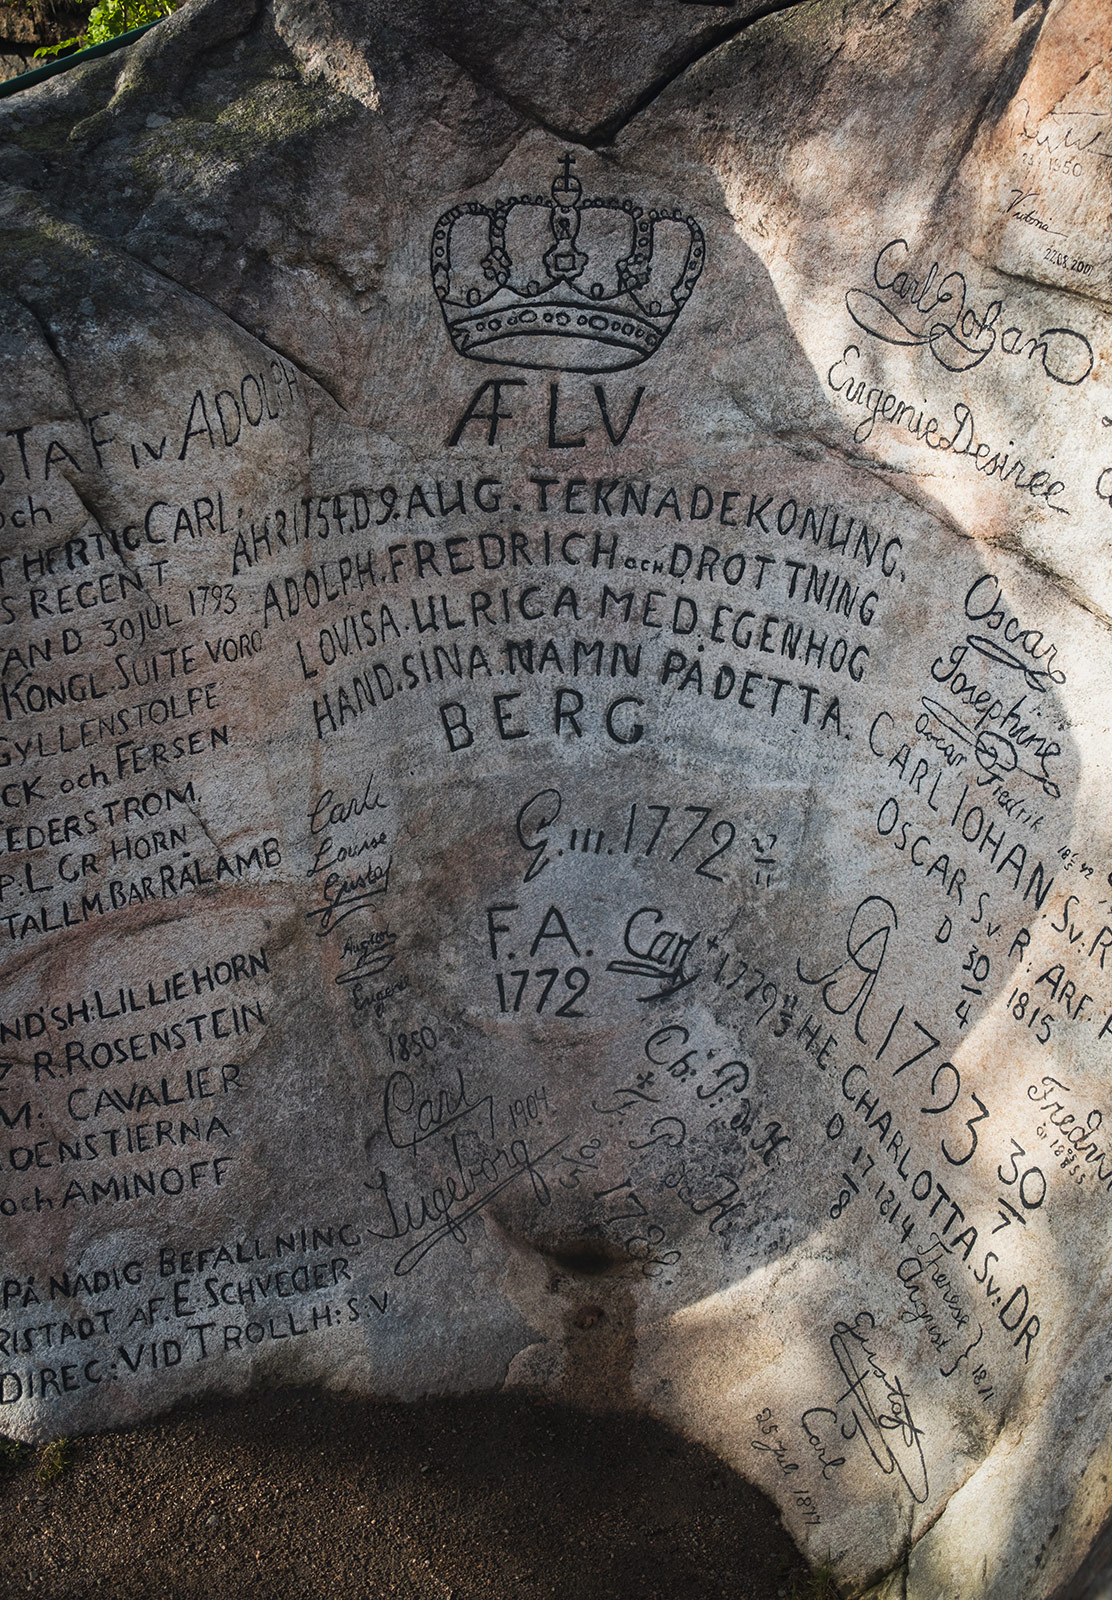 Names carved into large stone